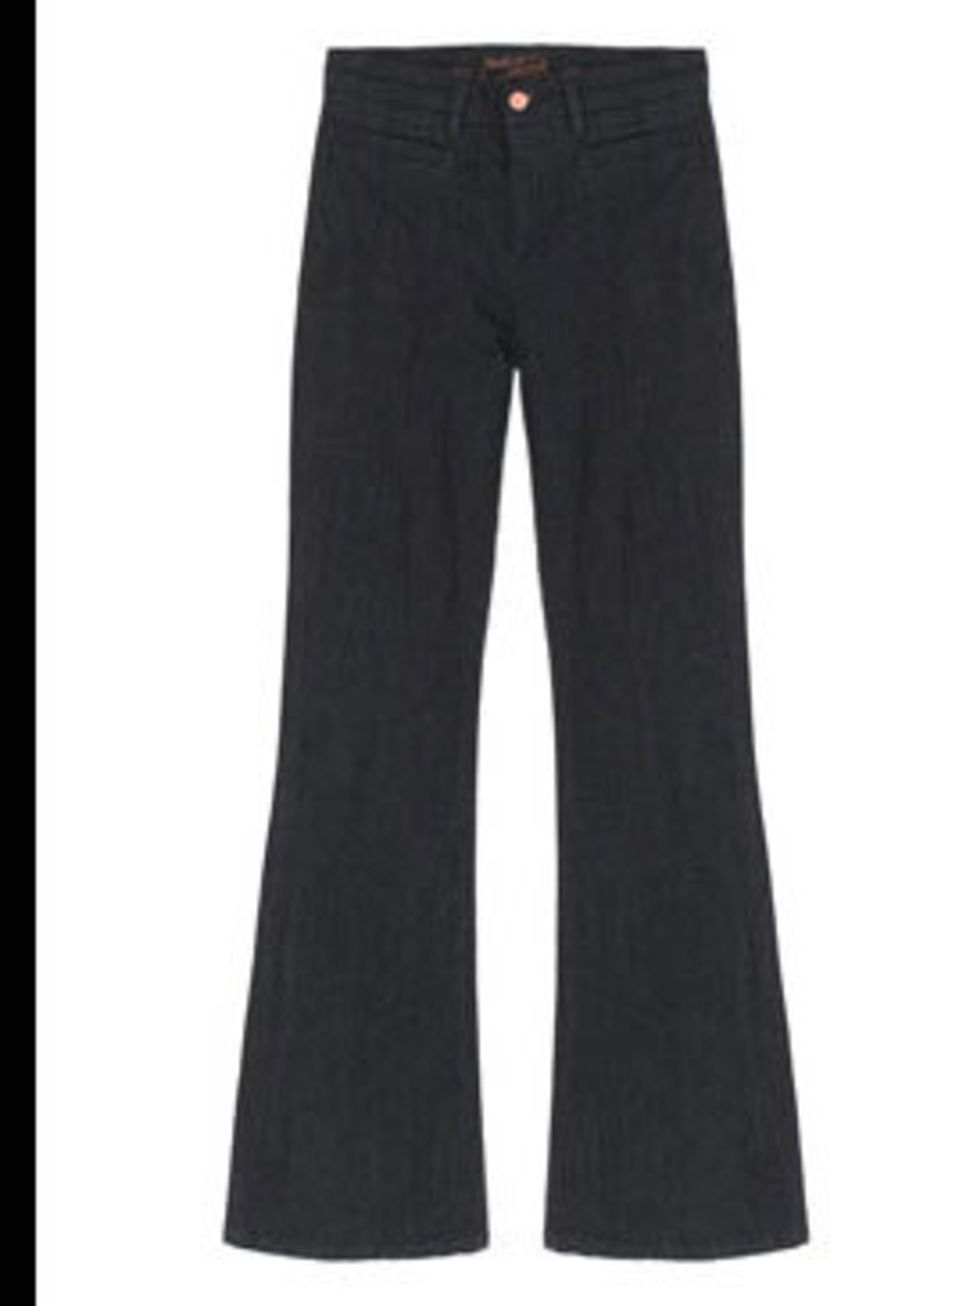 <p>'Marrakech Raw' jeans, £140 from Made in Heaven for stockists call 020 7225 3816 </p>